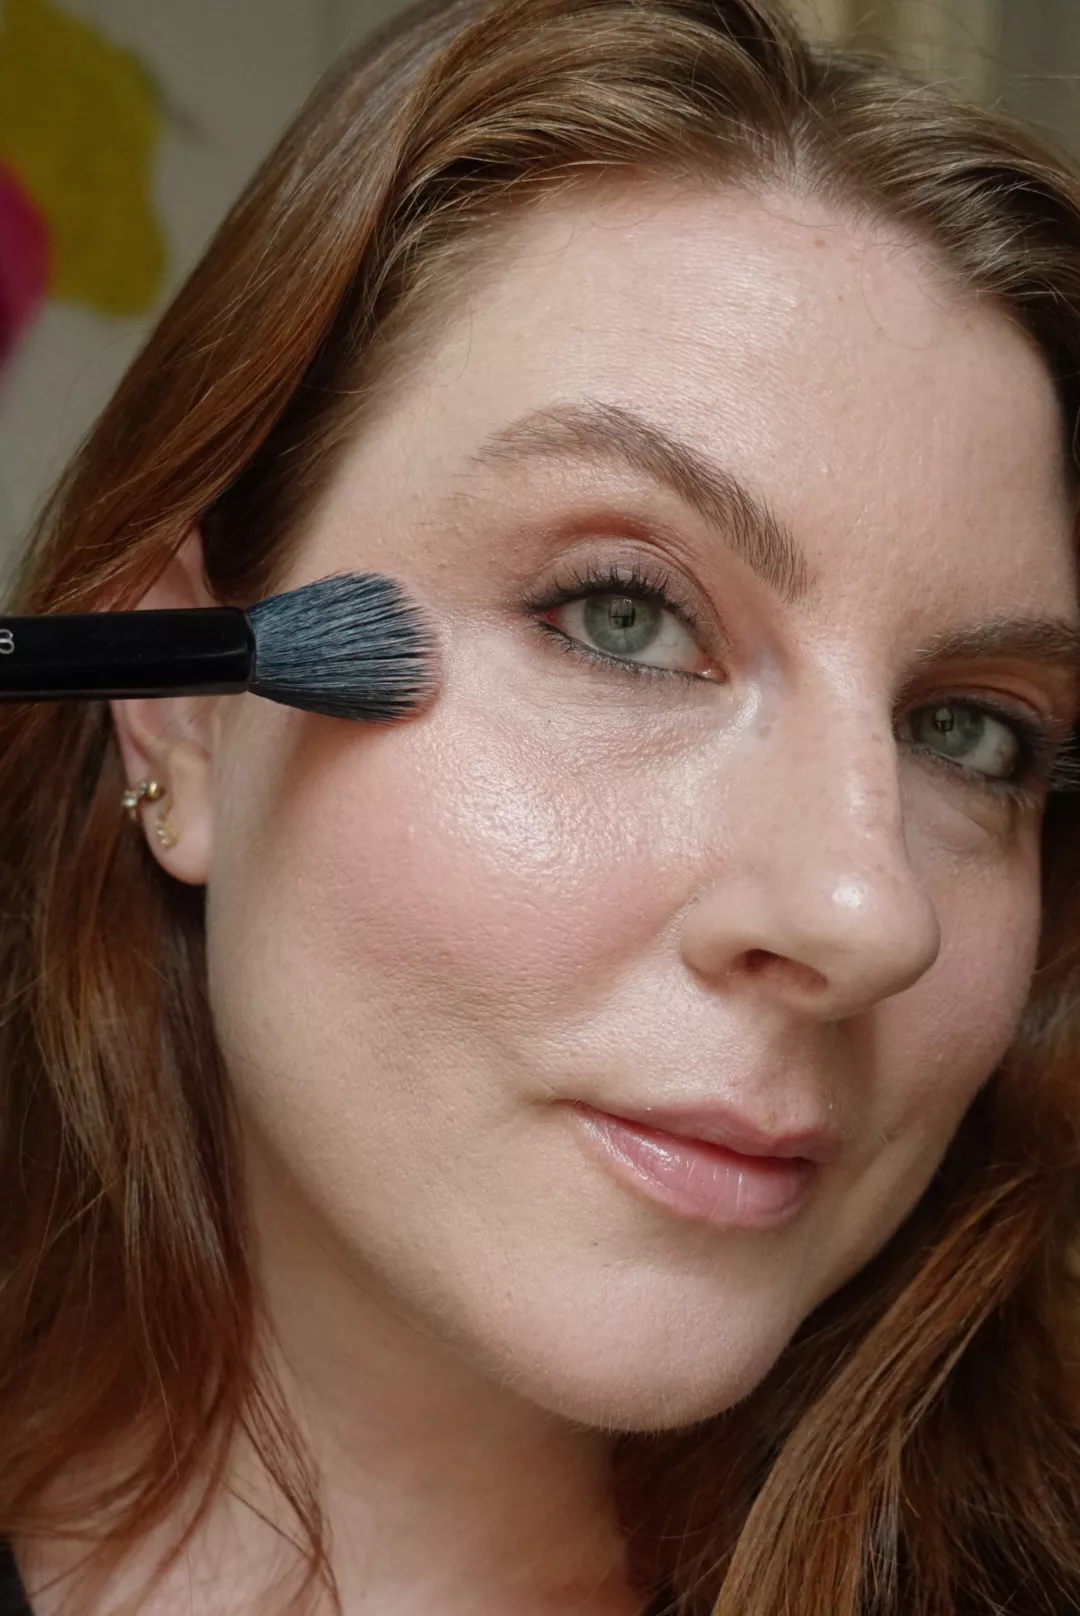 Makeup artist and Byrdie writer Ashley Rebecca applies highlighter to cheekbones with a brush